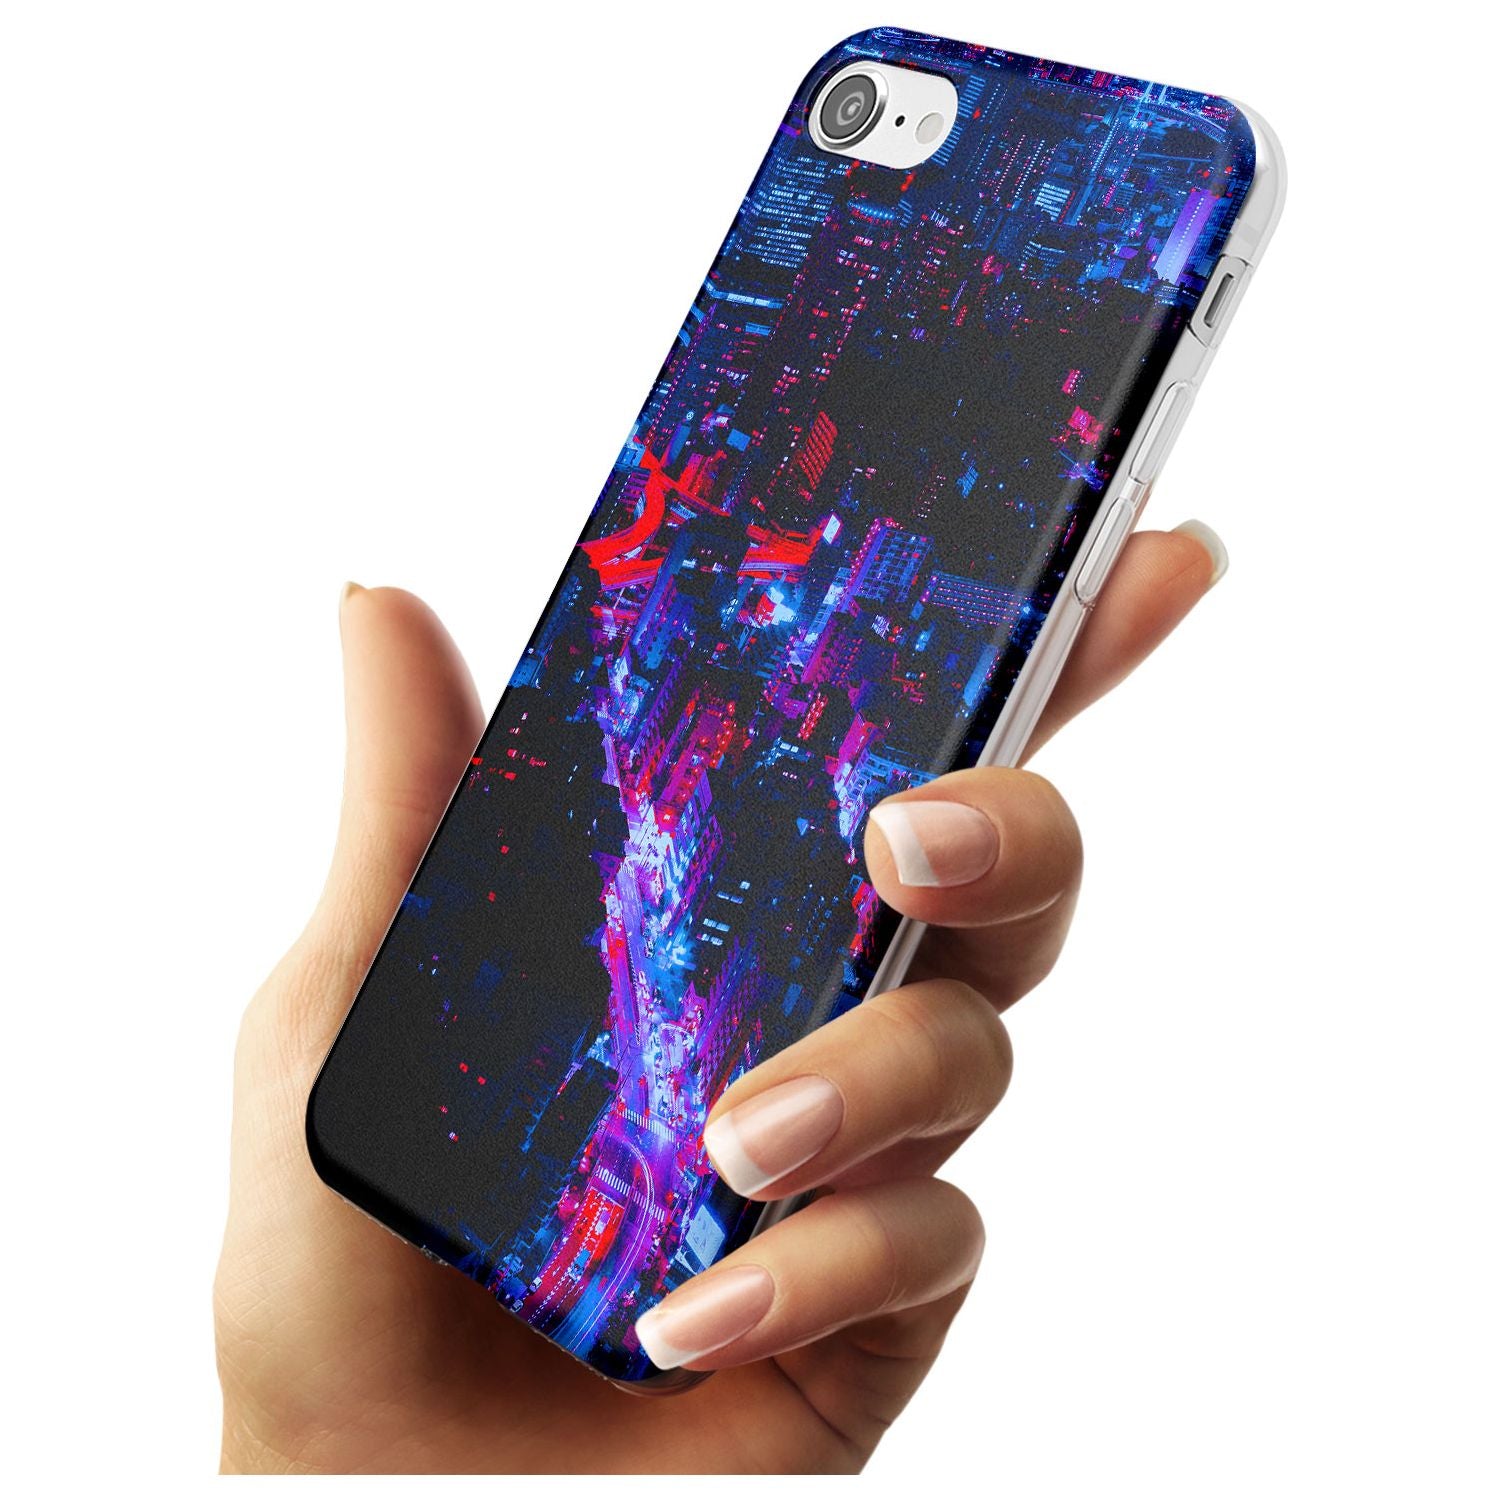 Arial City View - Neon Cities Photographs Slim TPU Phone Case for iPhone SE 8 7 Plus